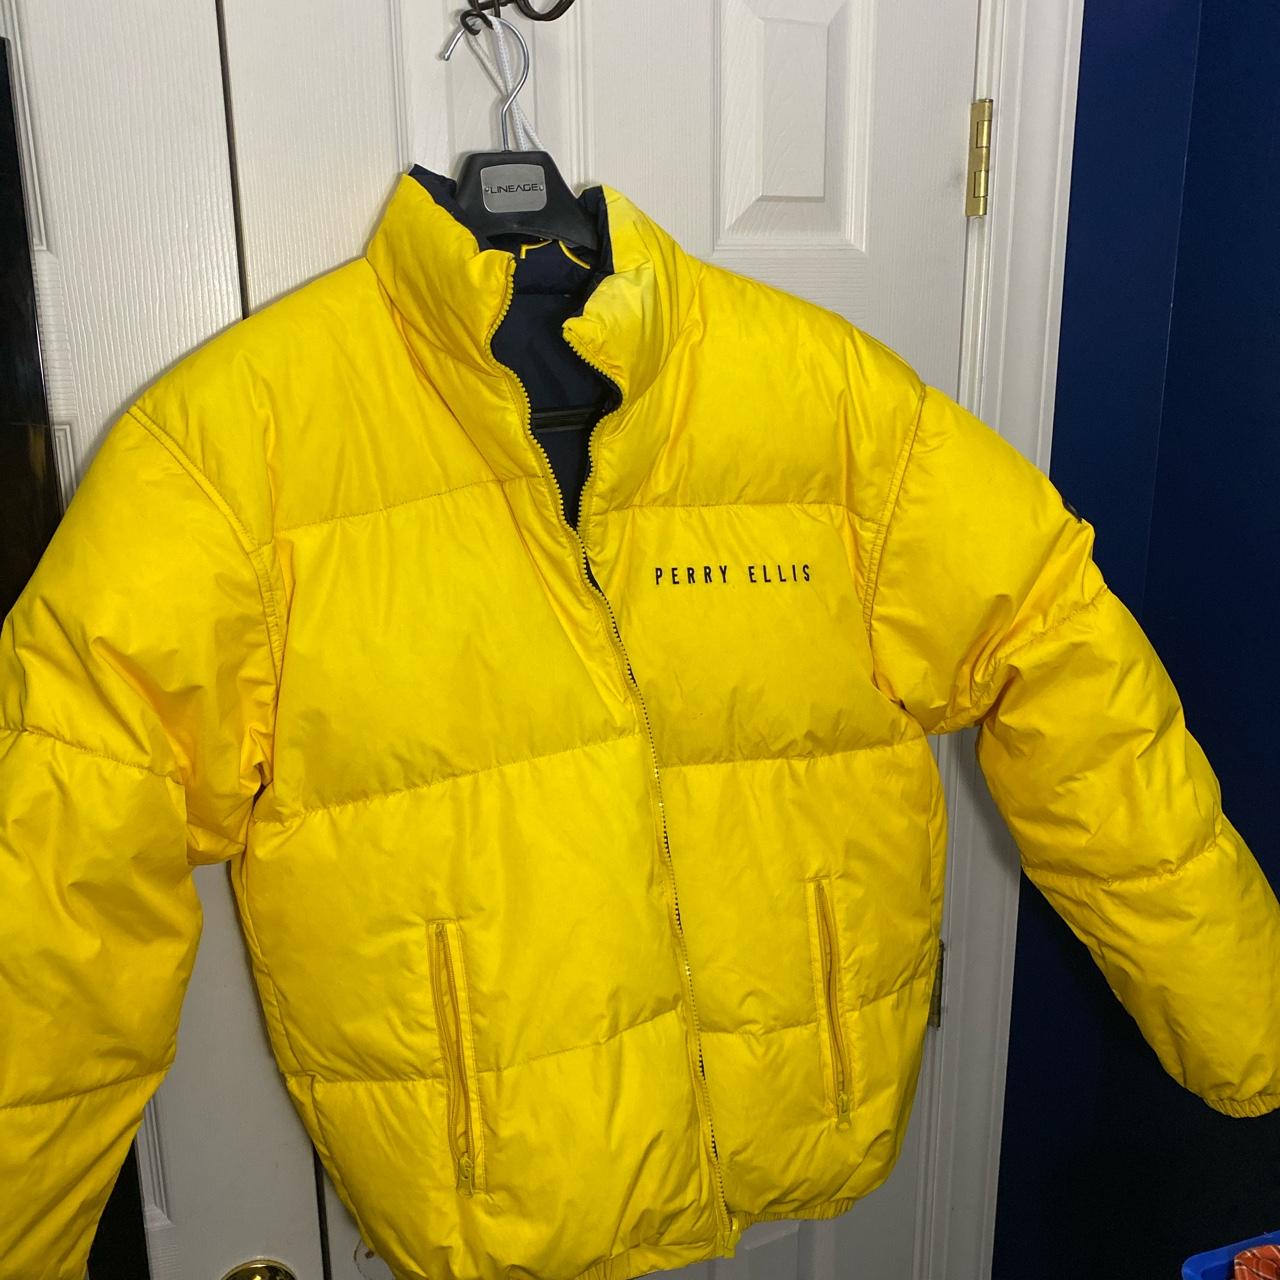 REVERSIBLE PERRY ELLIS PUFFER JACKET! Can fit a... - Depop